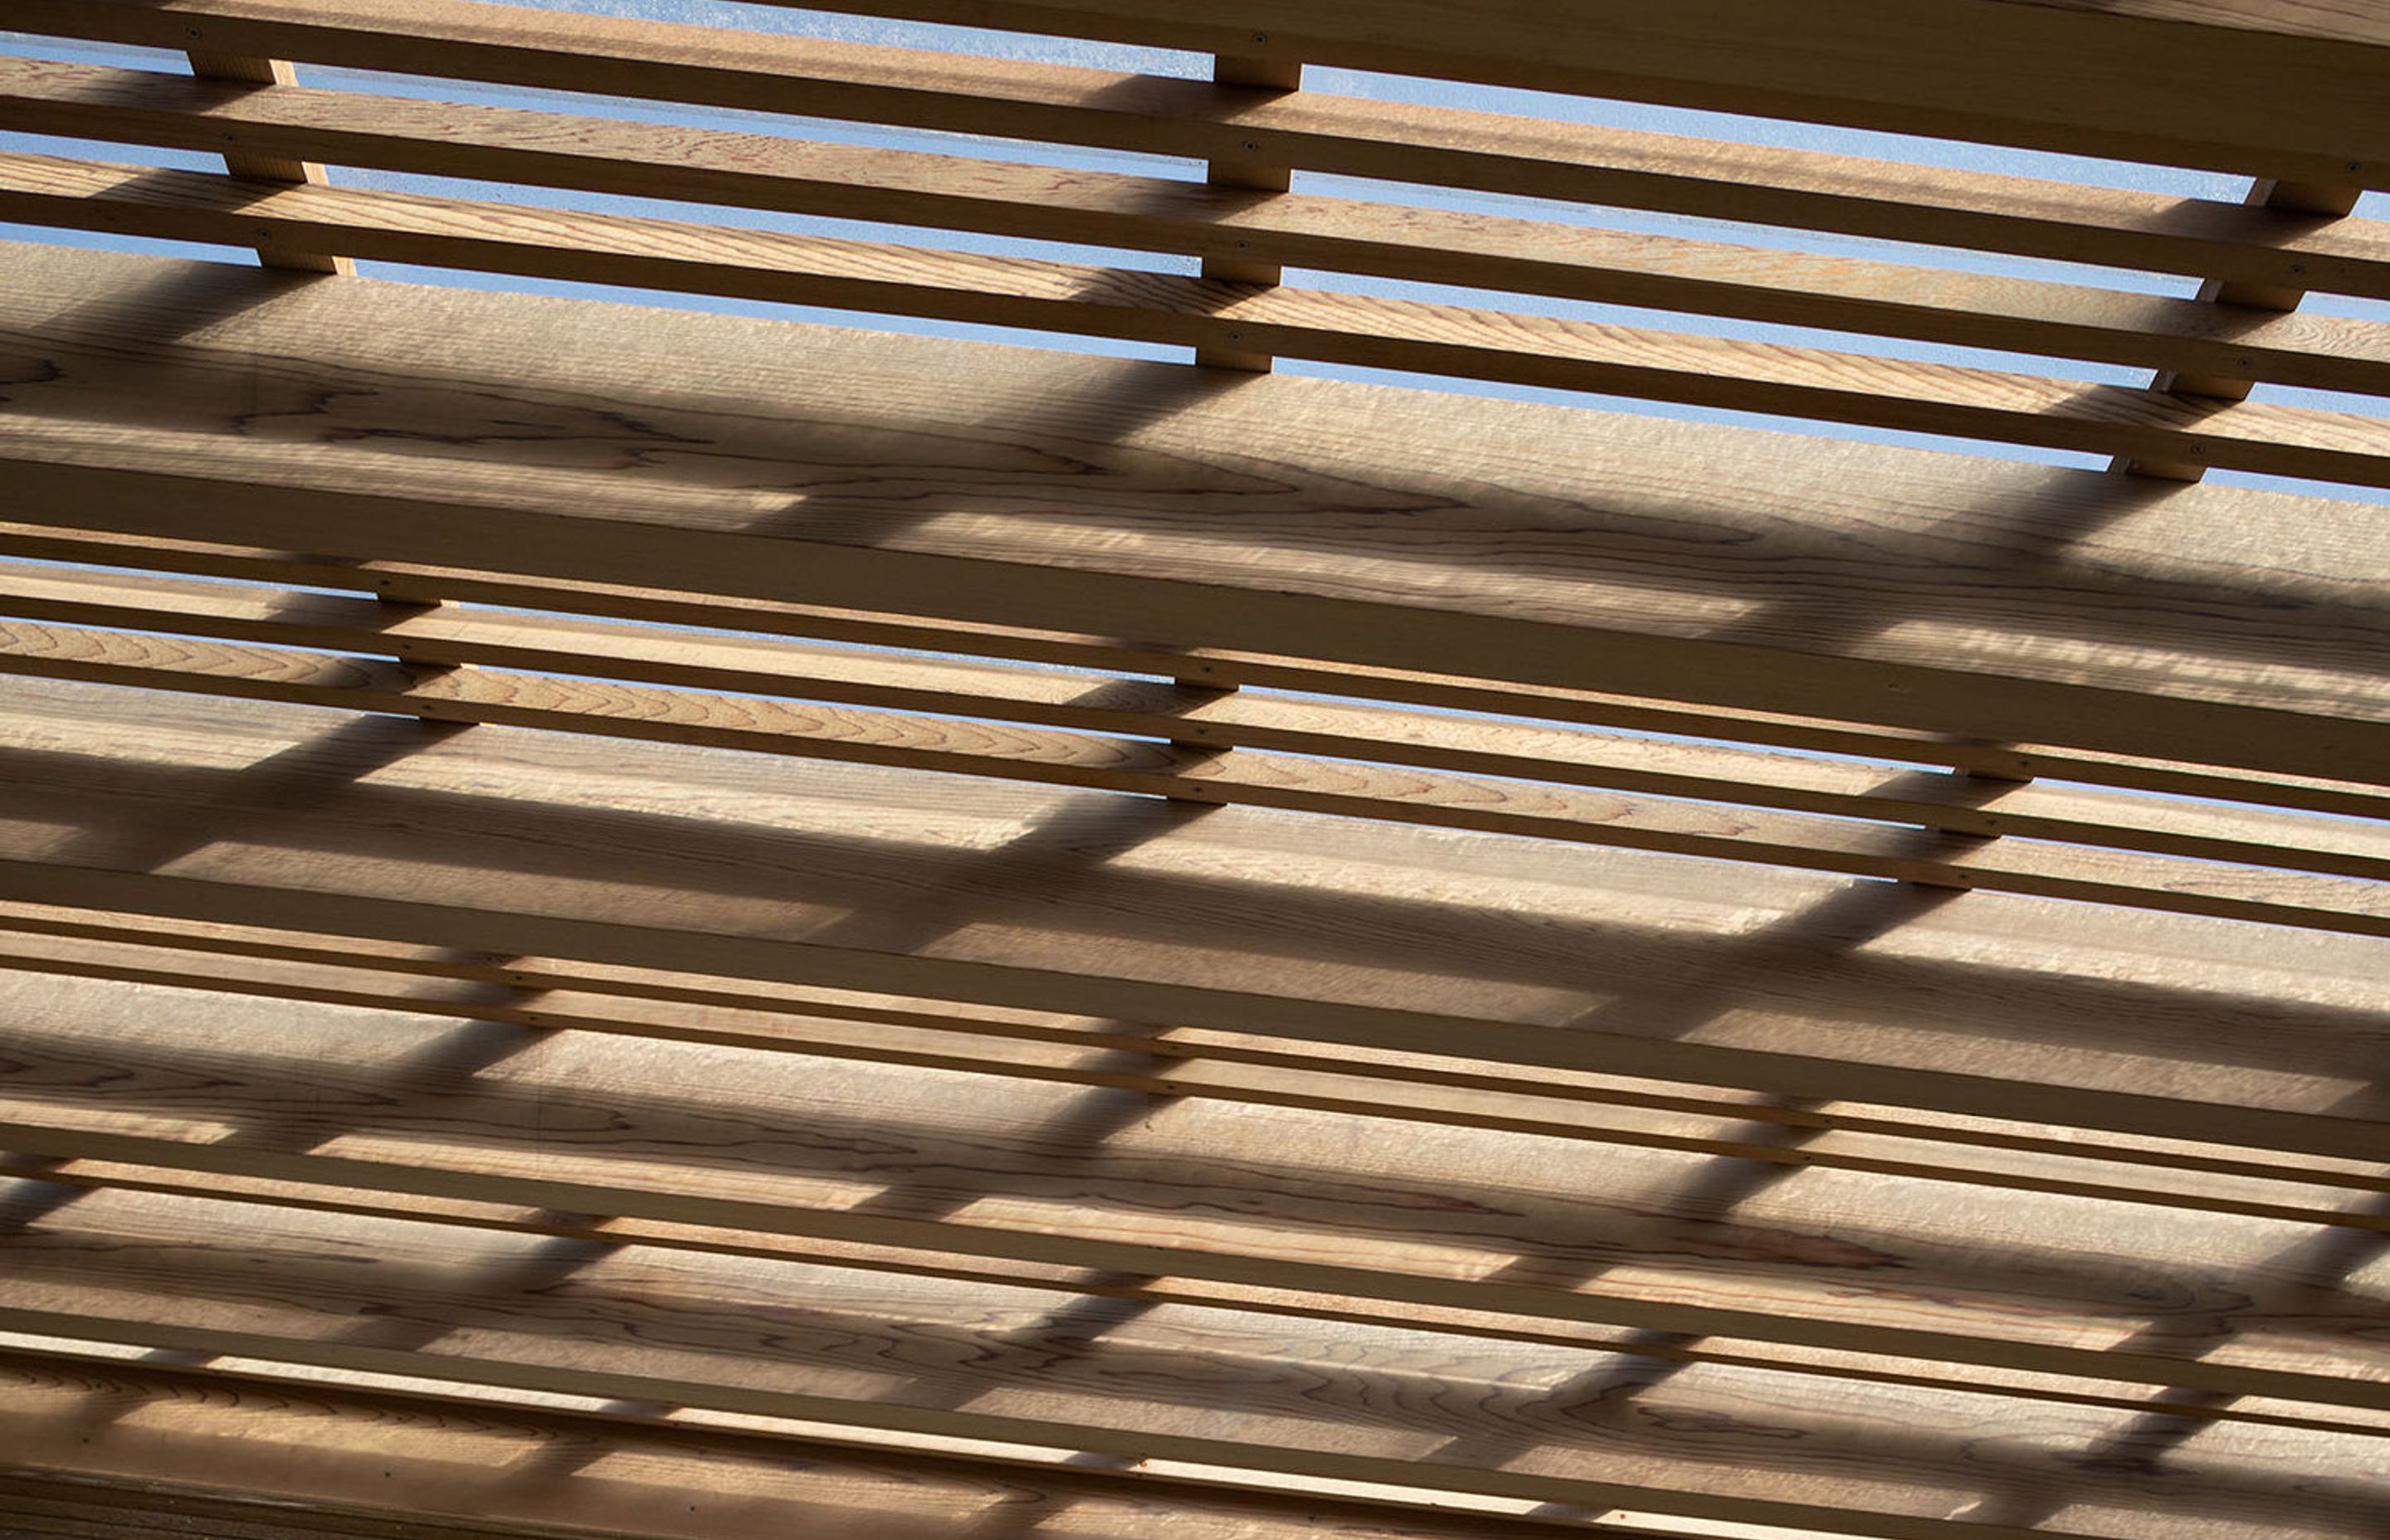 The slatted timber screen of the canopy has been protected from the coastal environment with Dryden WoodOil.